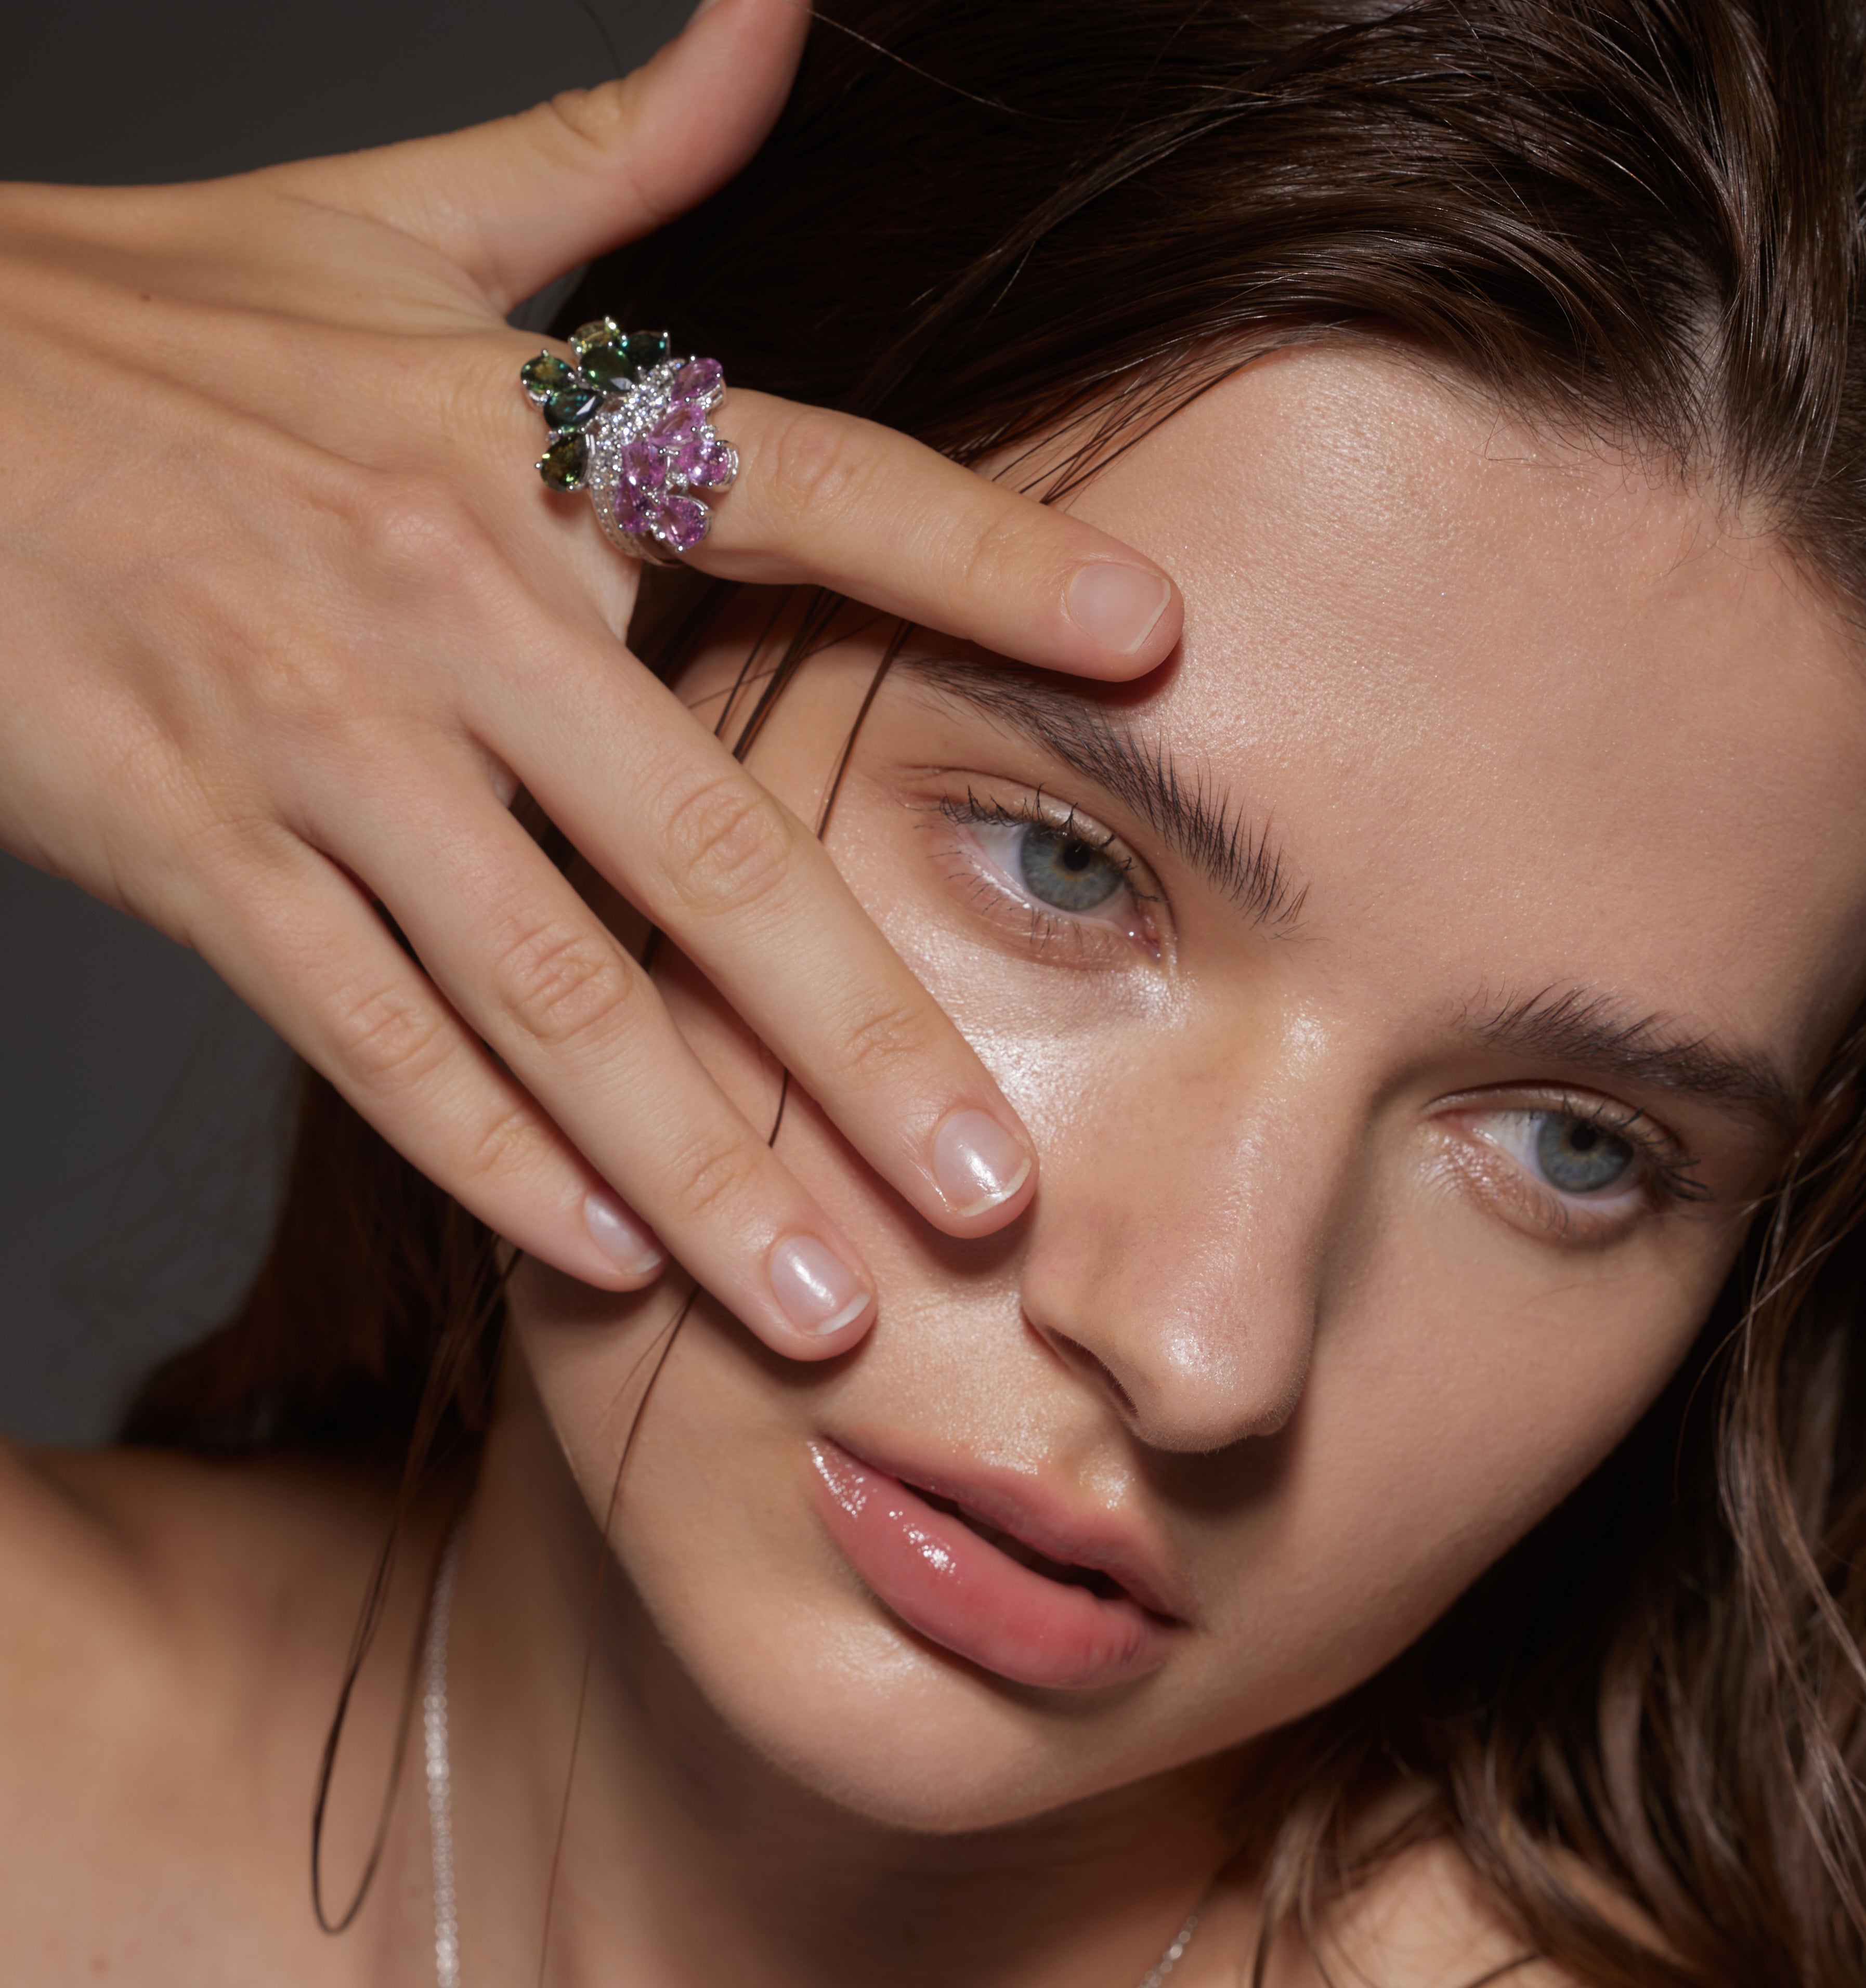 Model wears White Gold pink and green Twin Blossom Ring as she touches her face